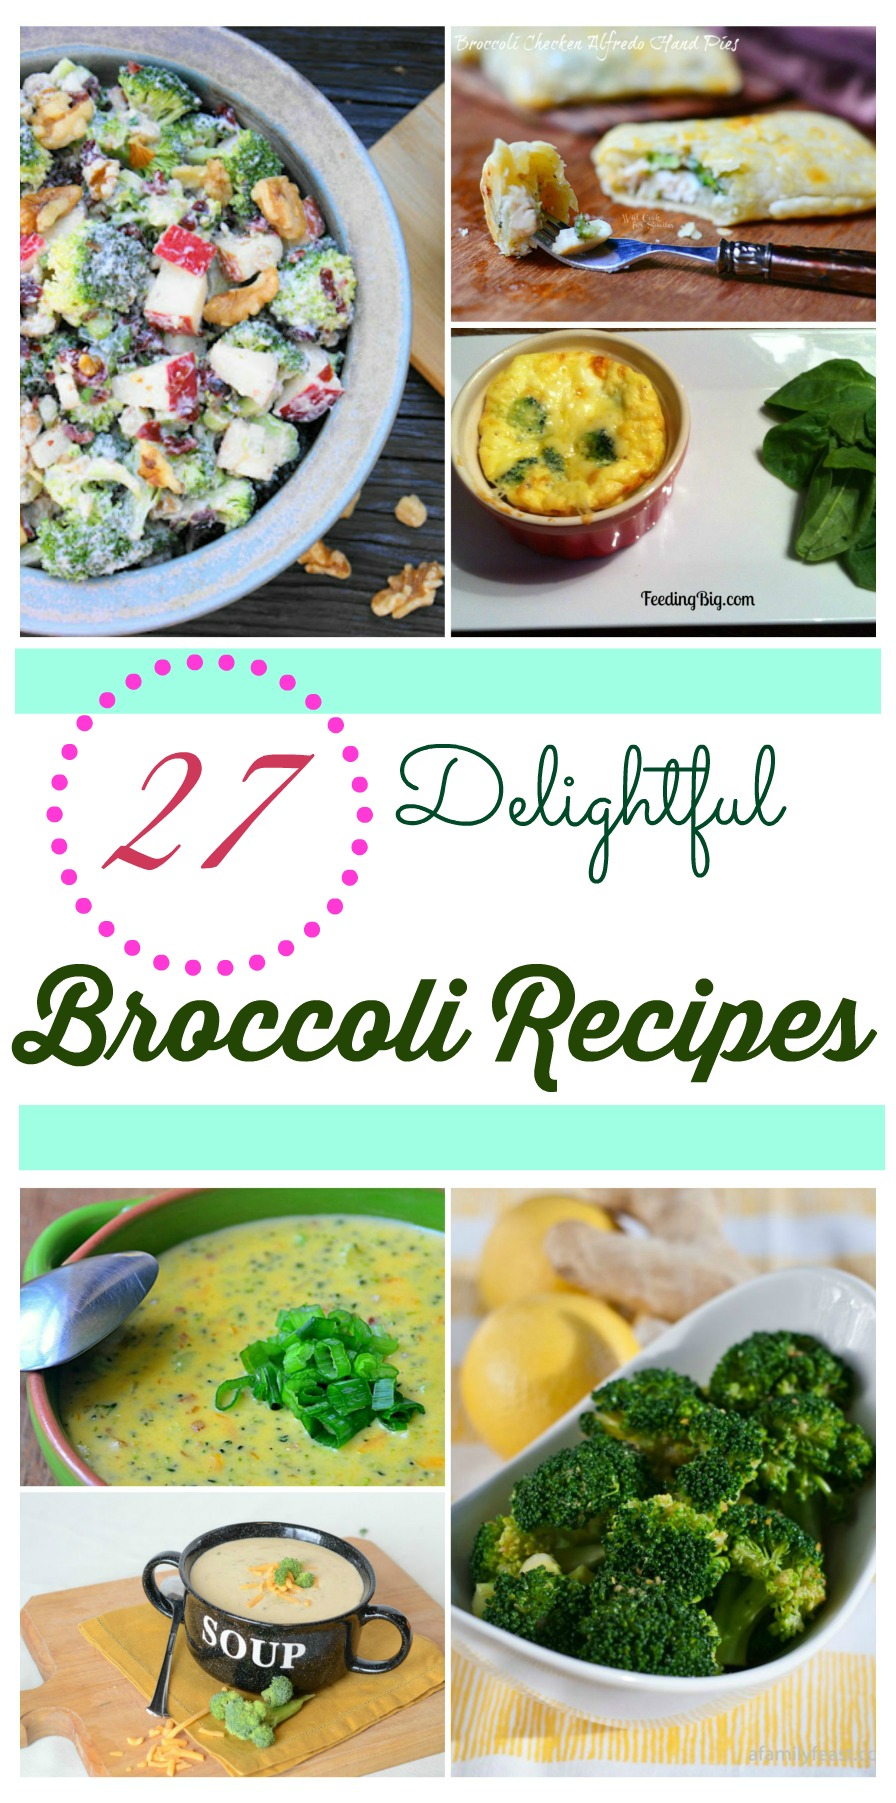 Looking for some new broccoli recipes? Check out our 26 Delightful Broccoli Recipes round up here! 